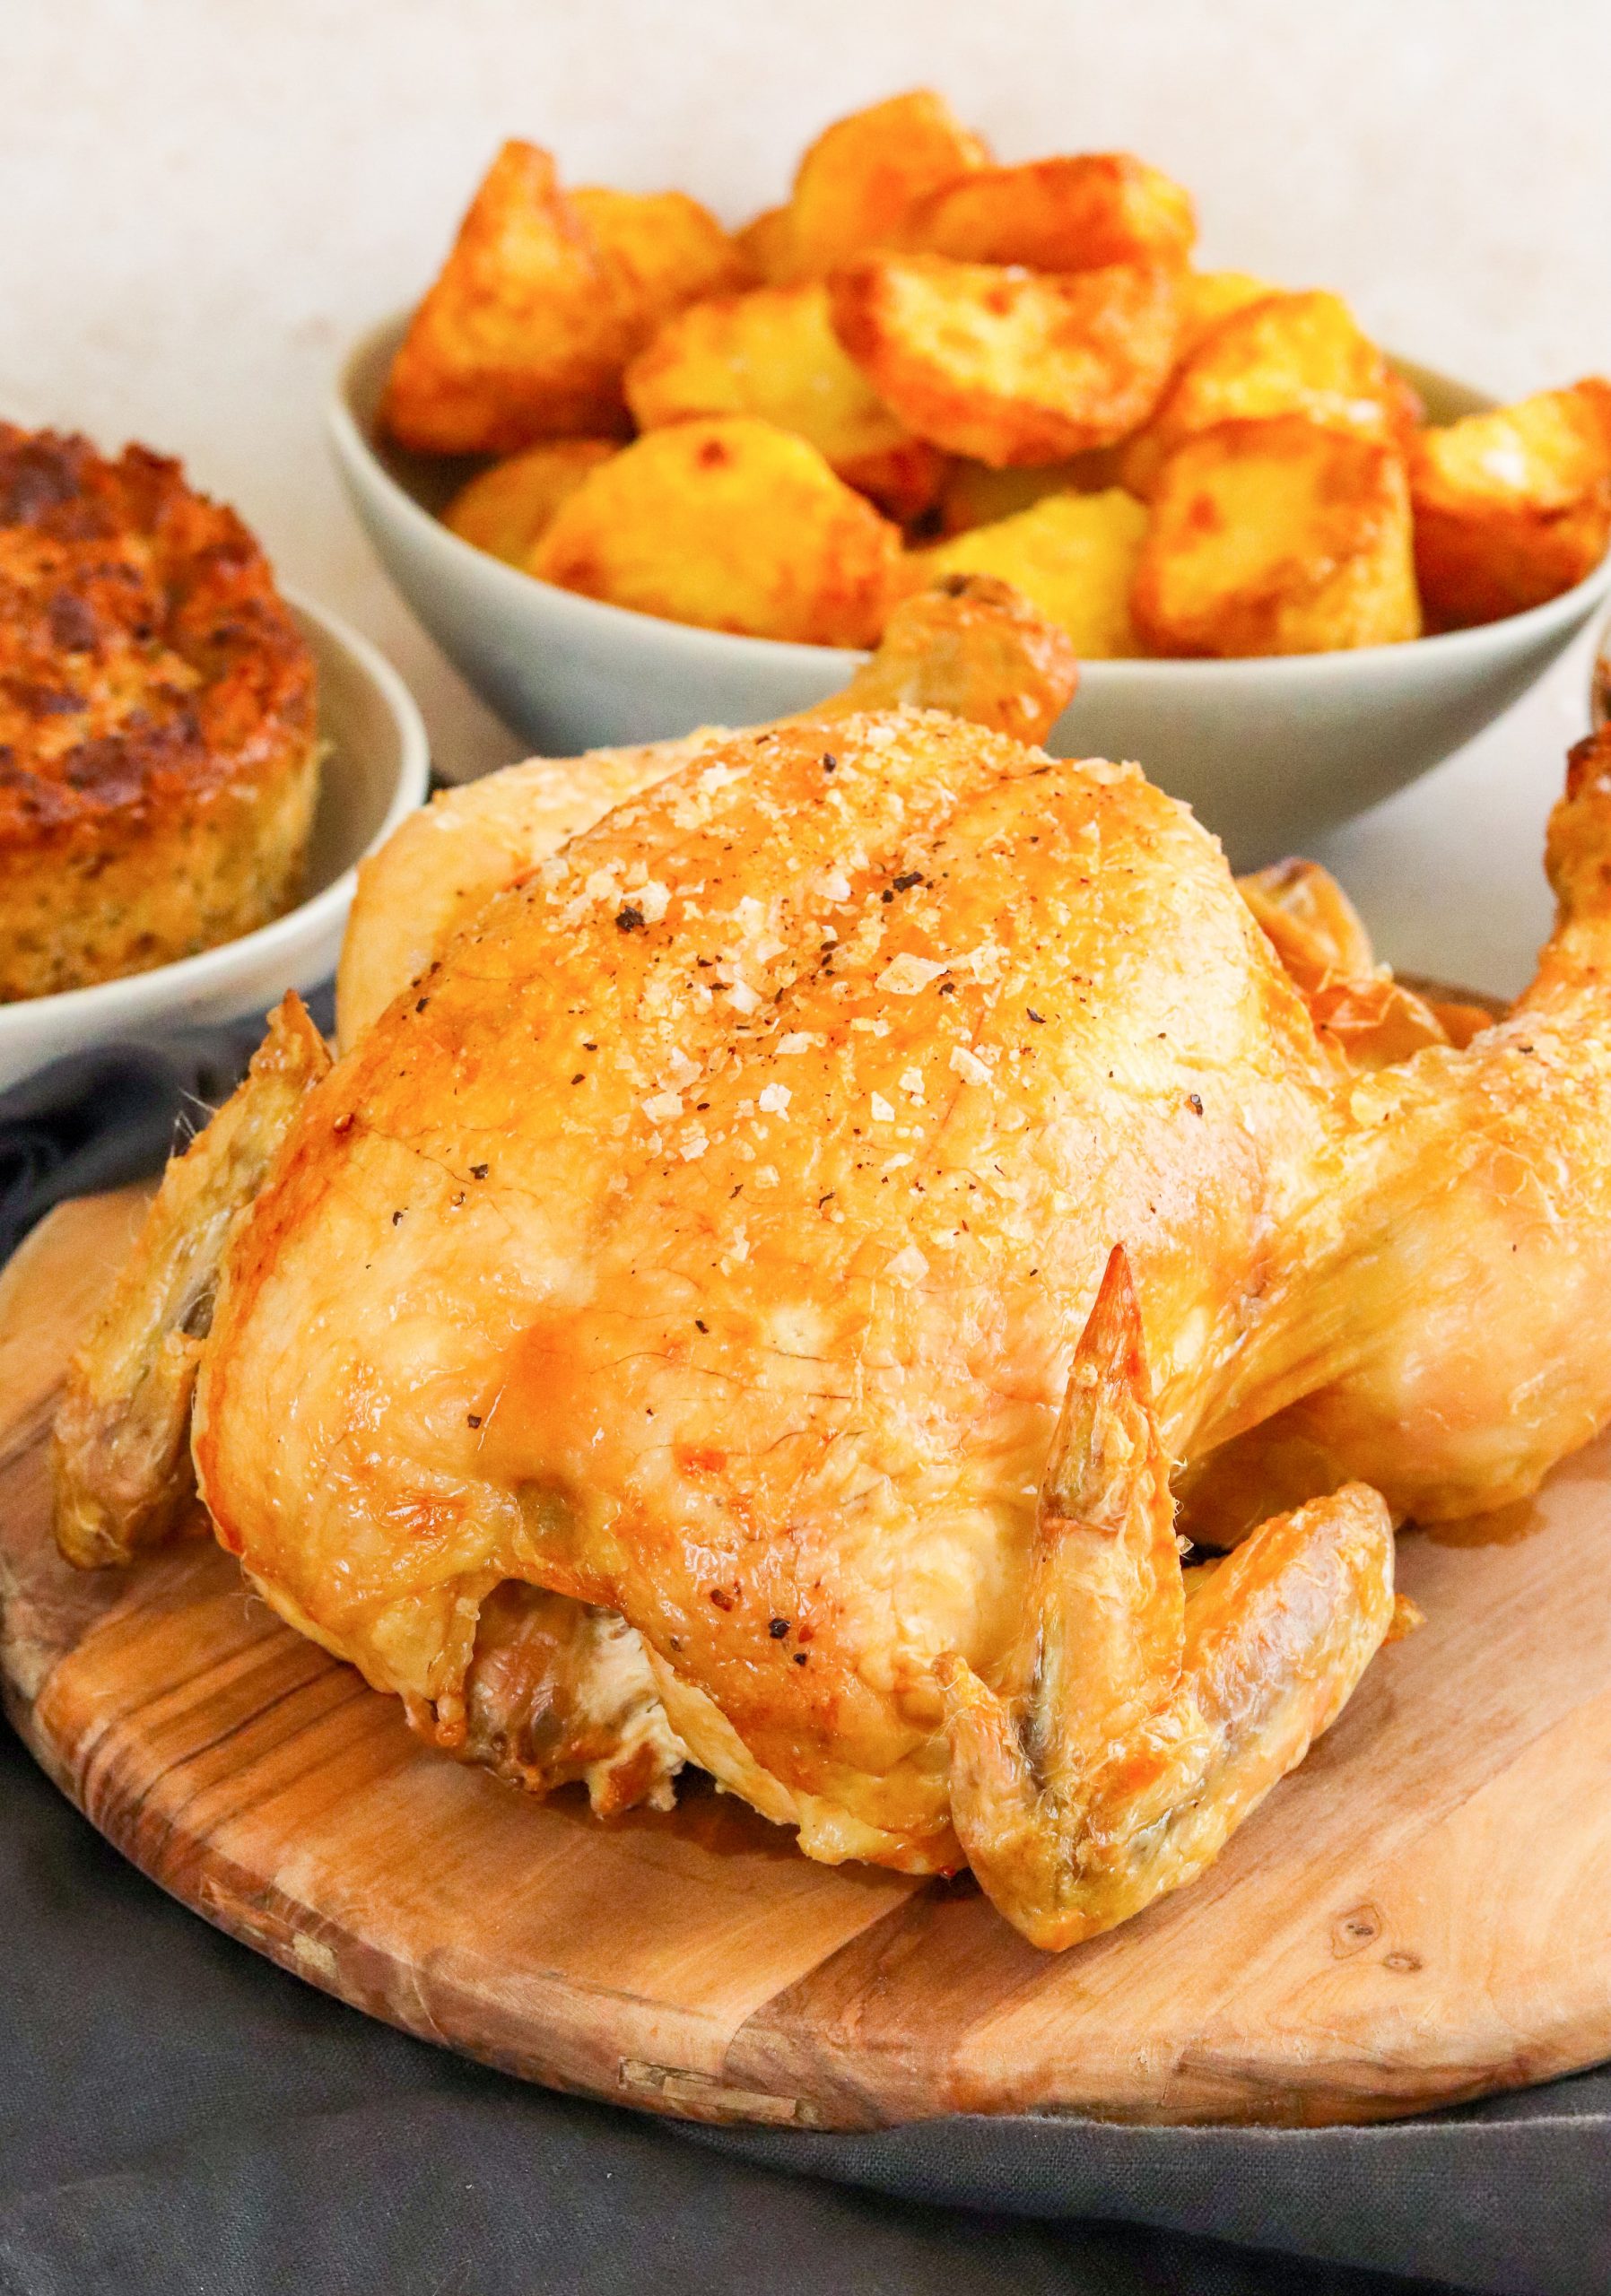 https://www.curlyscooking.co.uk/wp-content/uploads/2022/11/Simple-Air-Fryer-Whole-Roast-Chicken-9-scaled.jpg